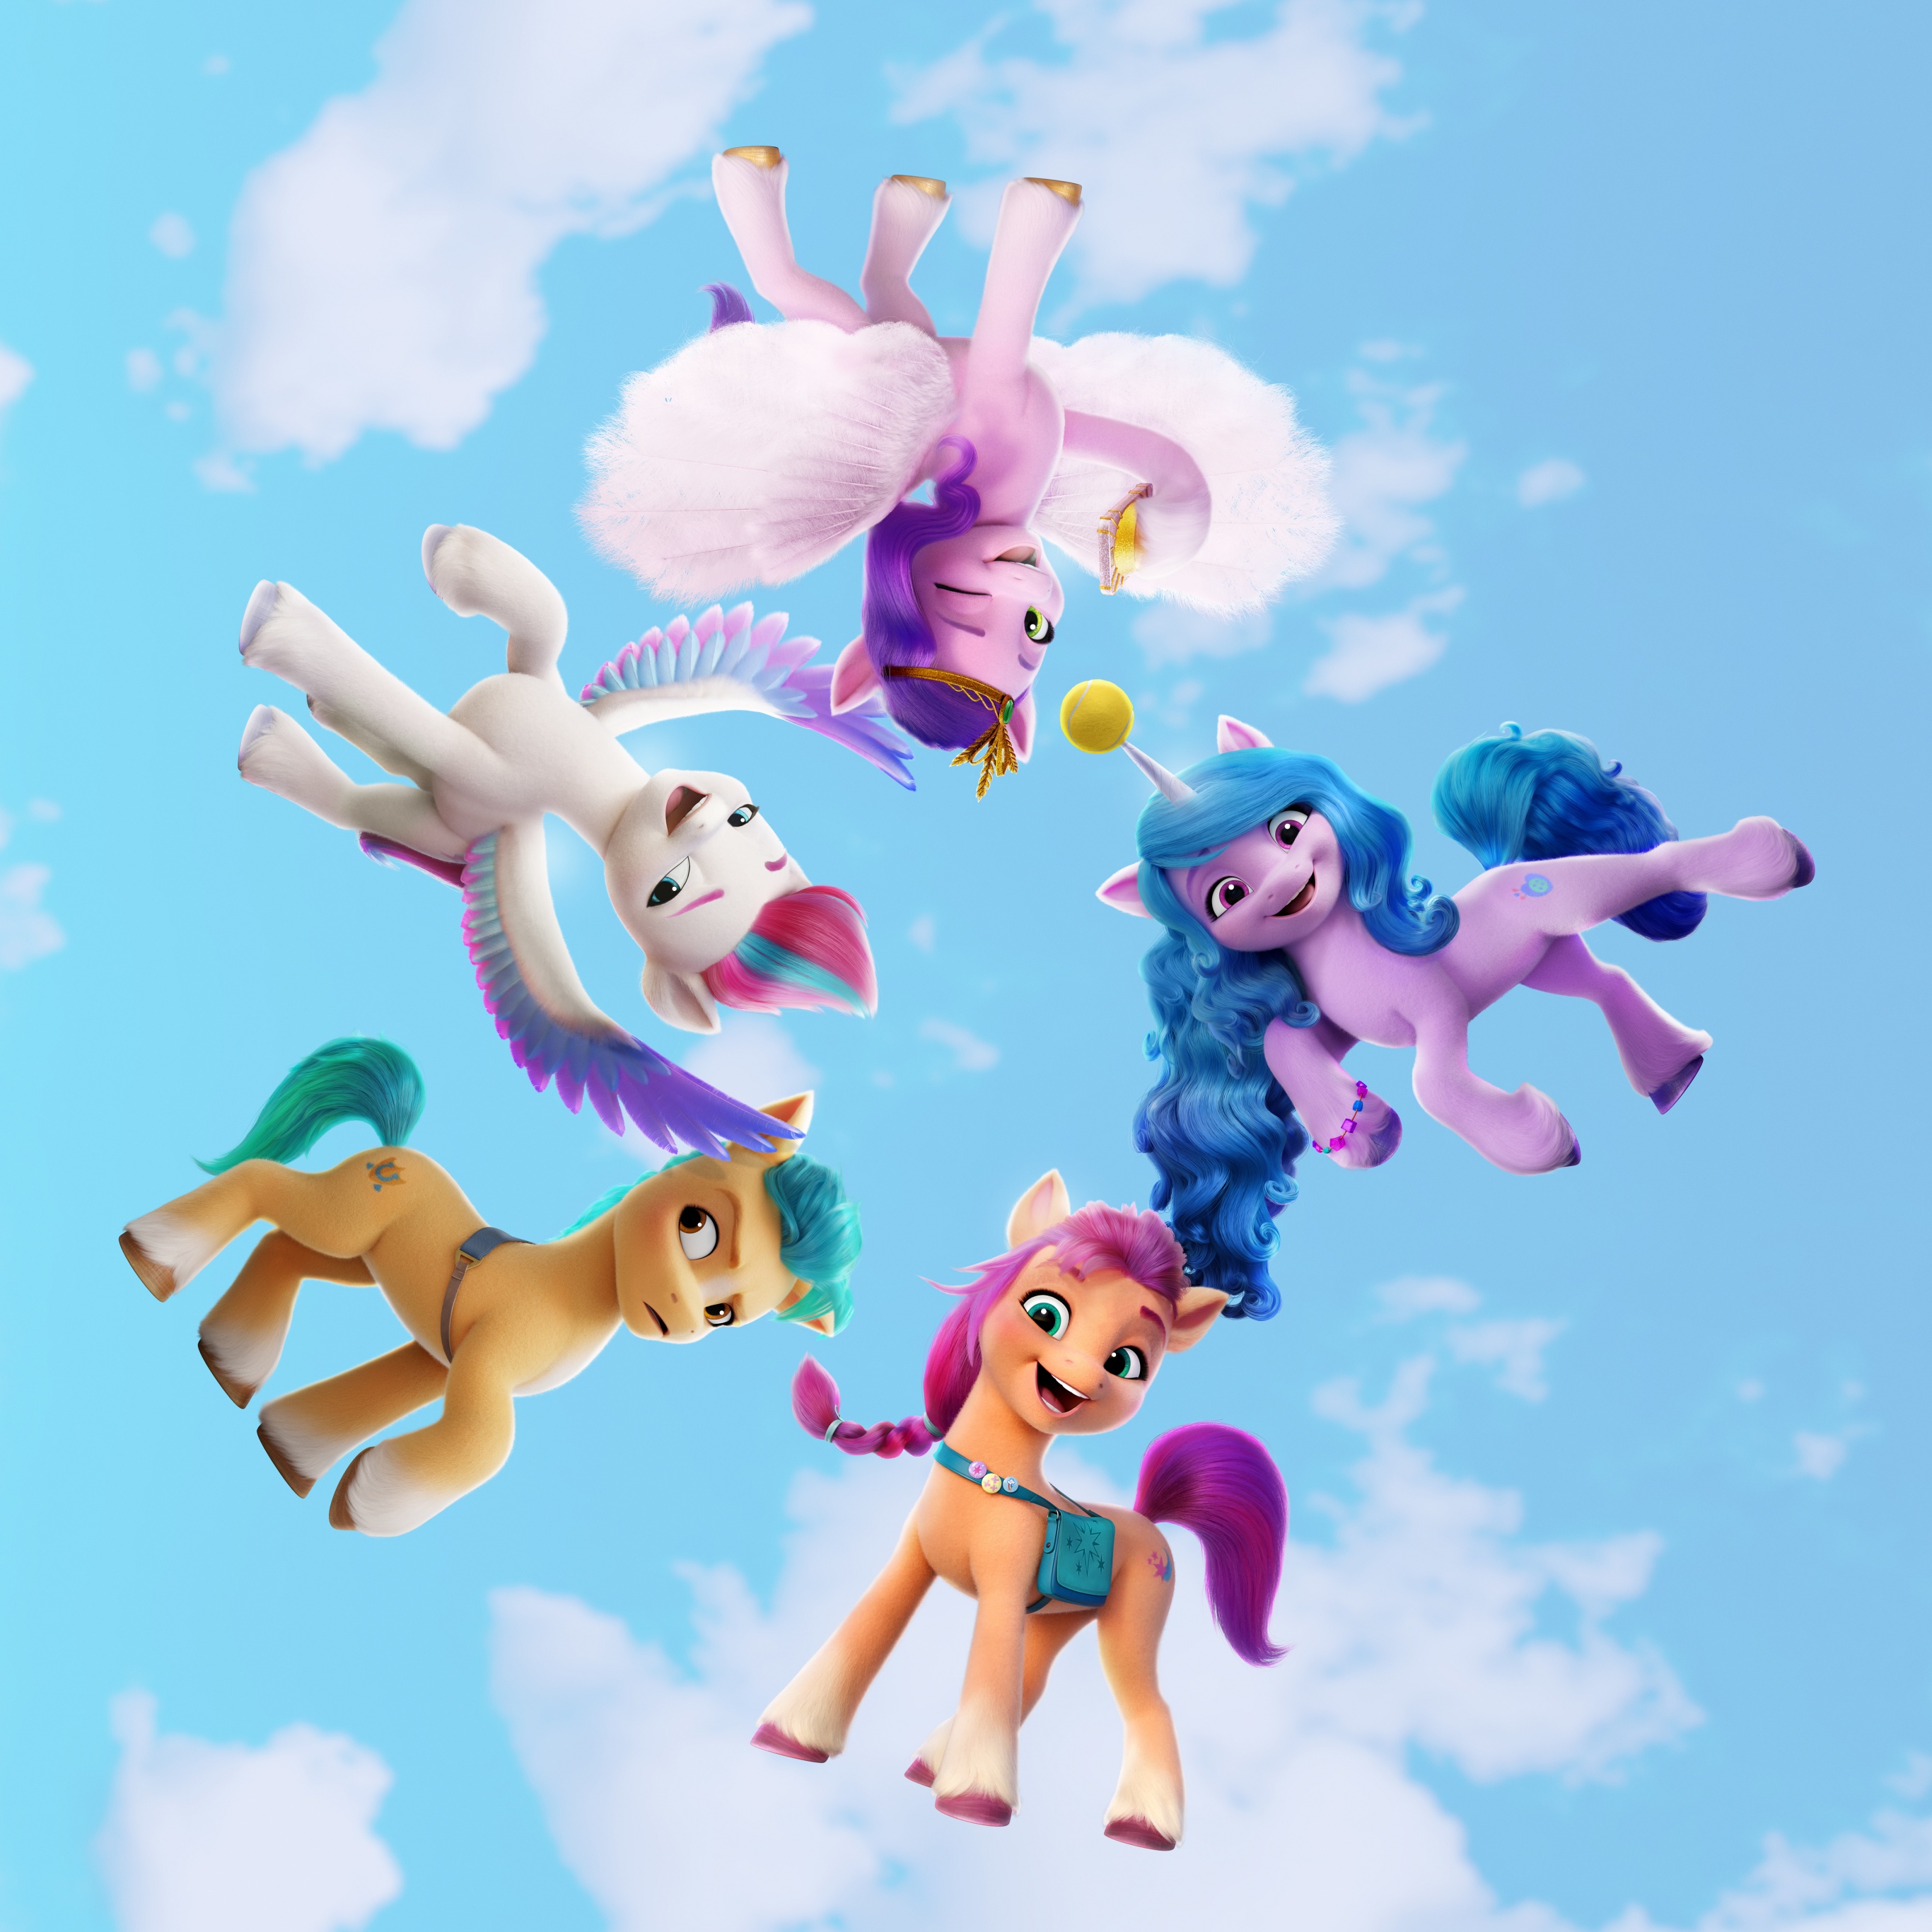 My Little Pony: A New Generation Wallpaper 4K, 2021 Movies, Movies, #6778